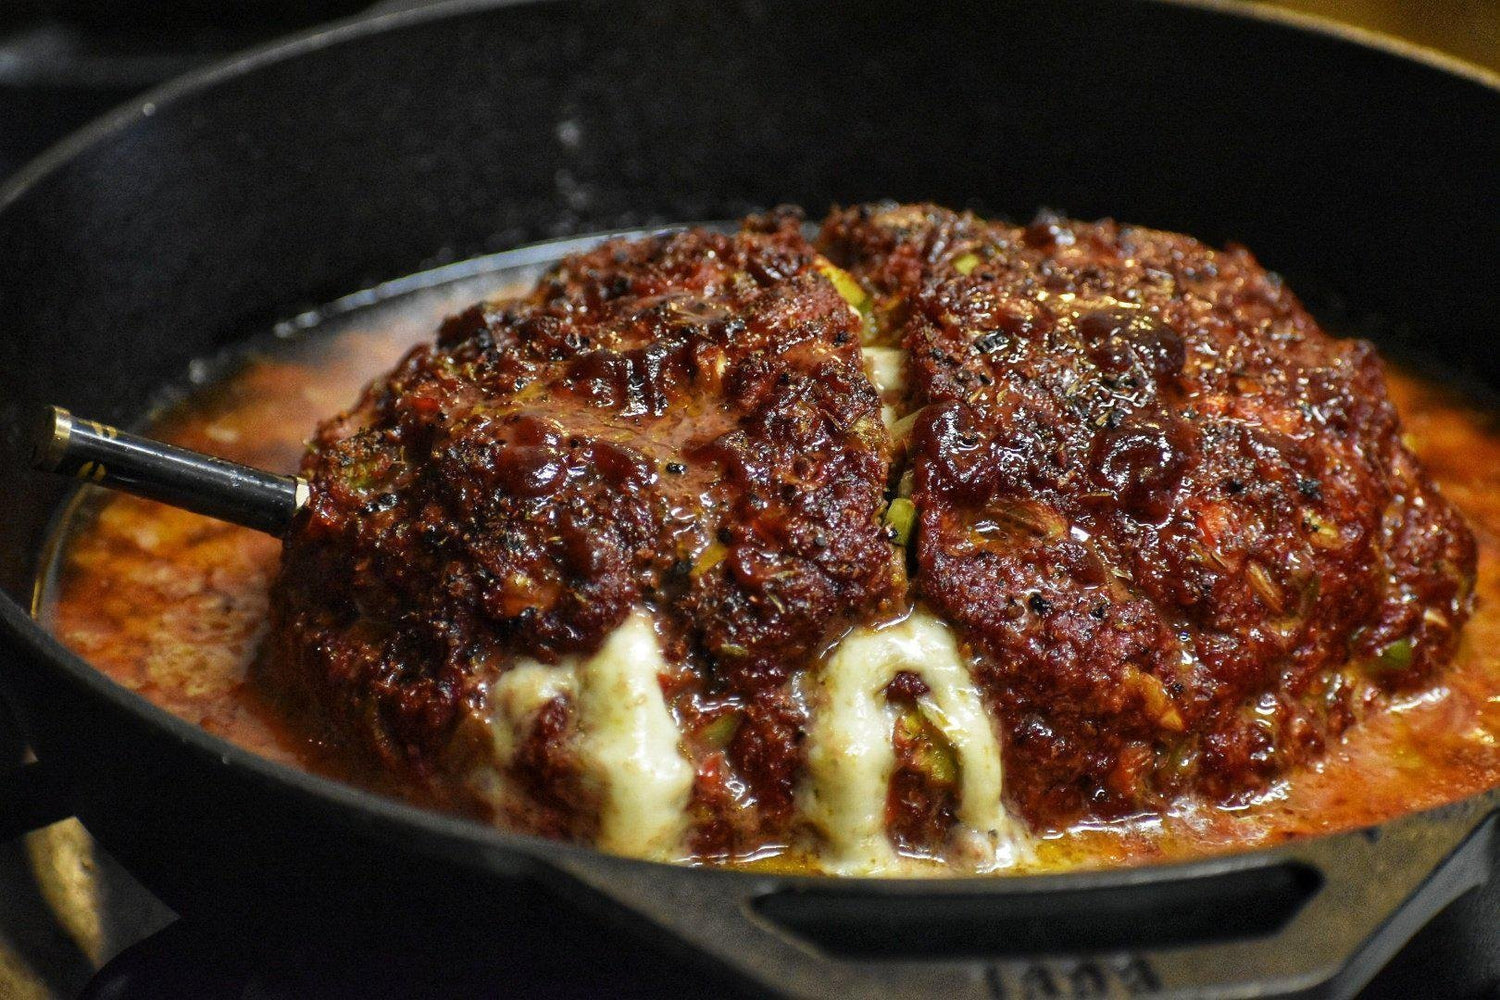 Smoked Stuffed Meatloaf with melted cheese. 